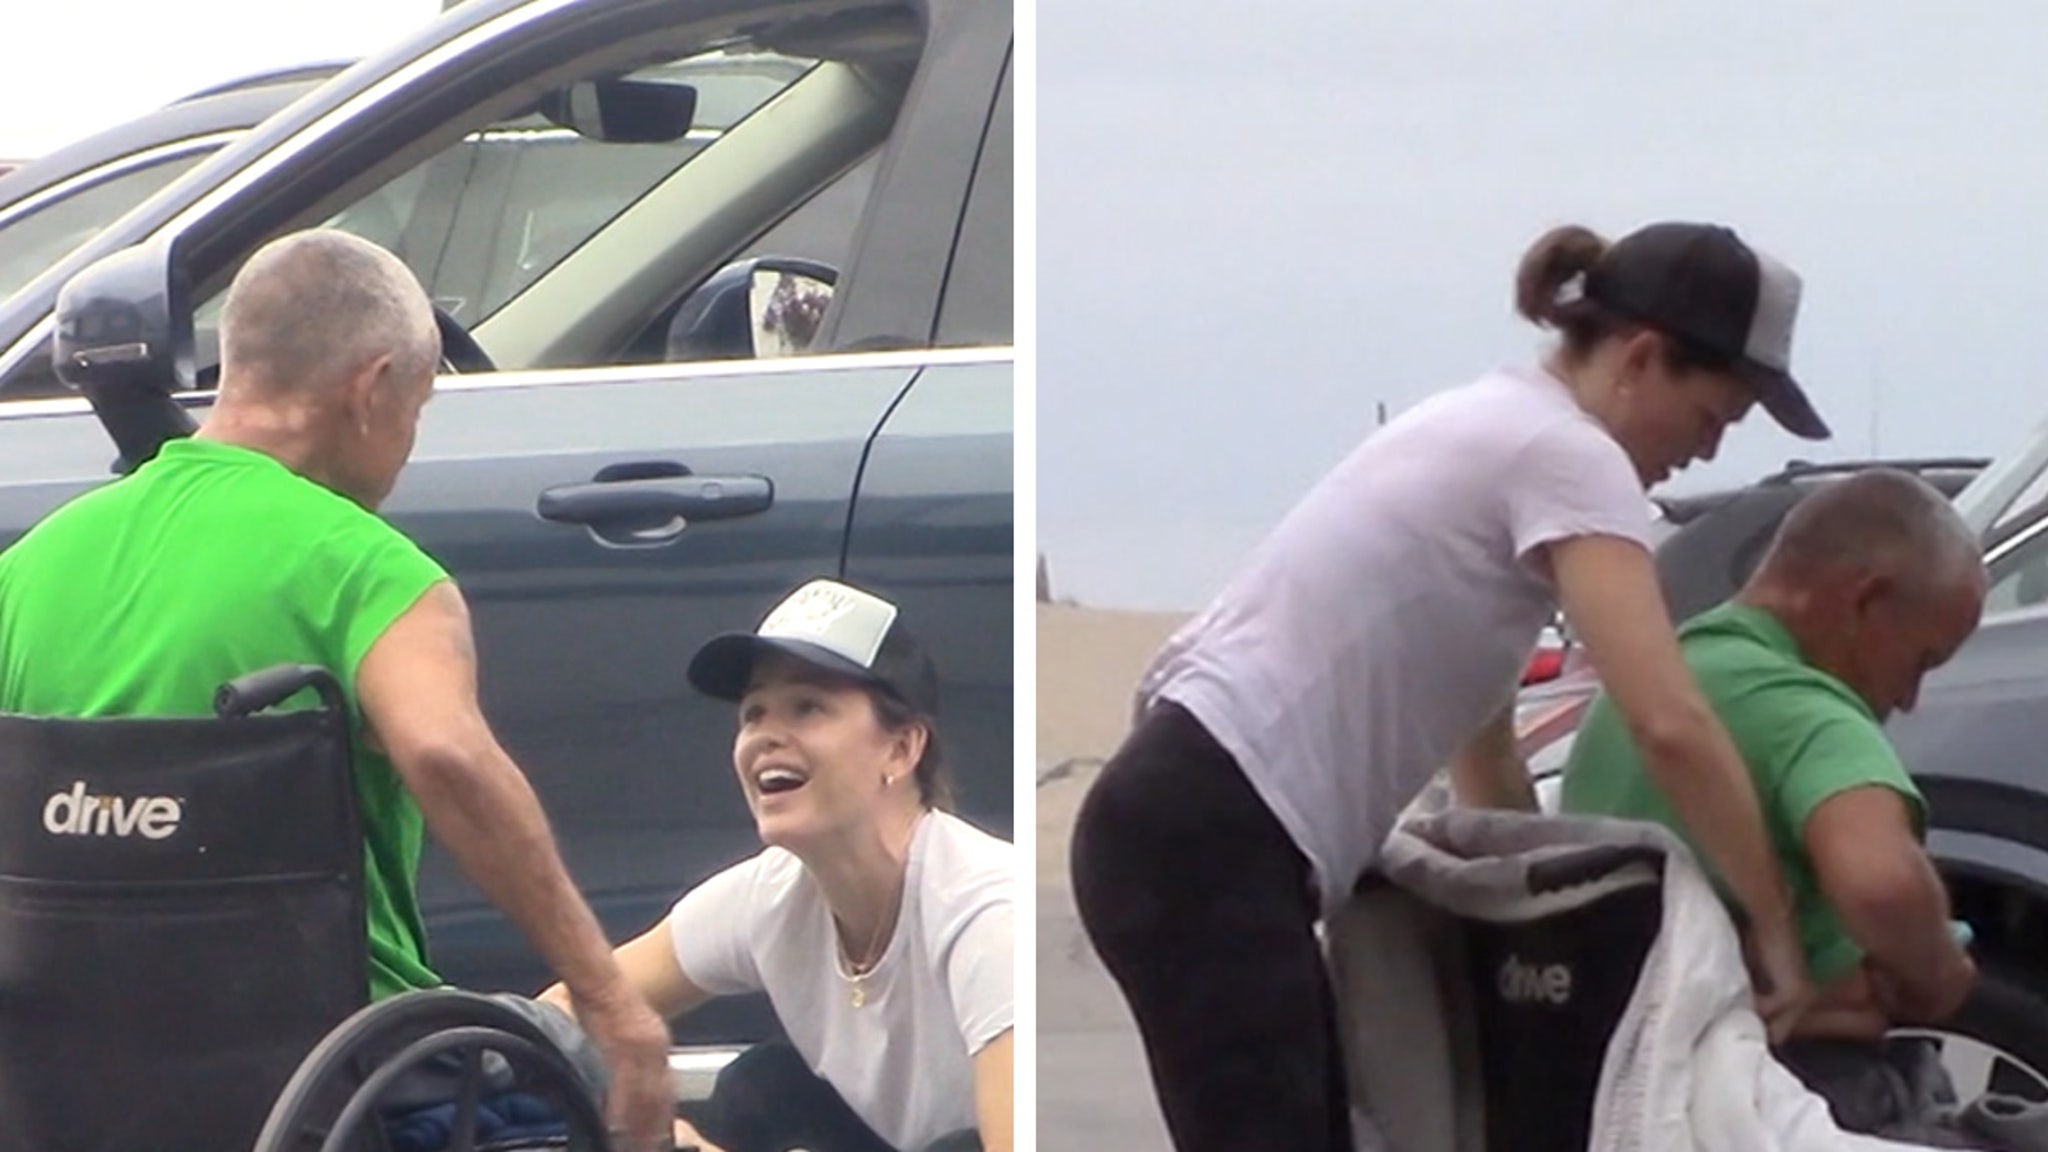 Jennifer Garner Helps Homeless Man In Wheelchair, Offers Up Her Own Shoes